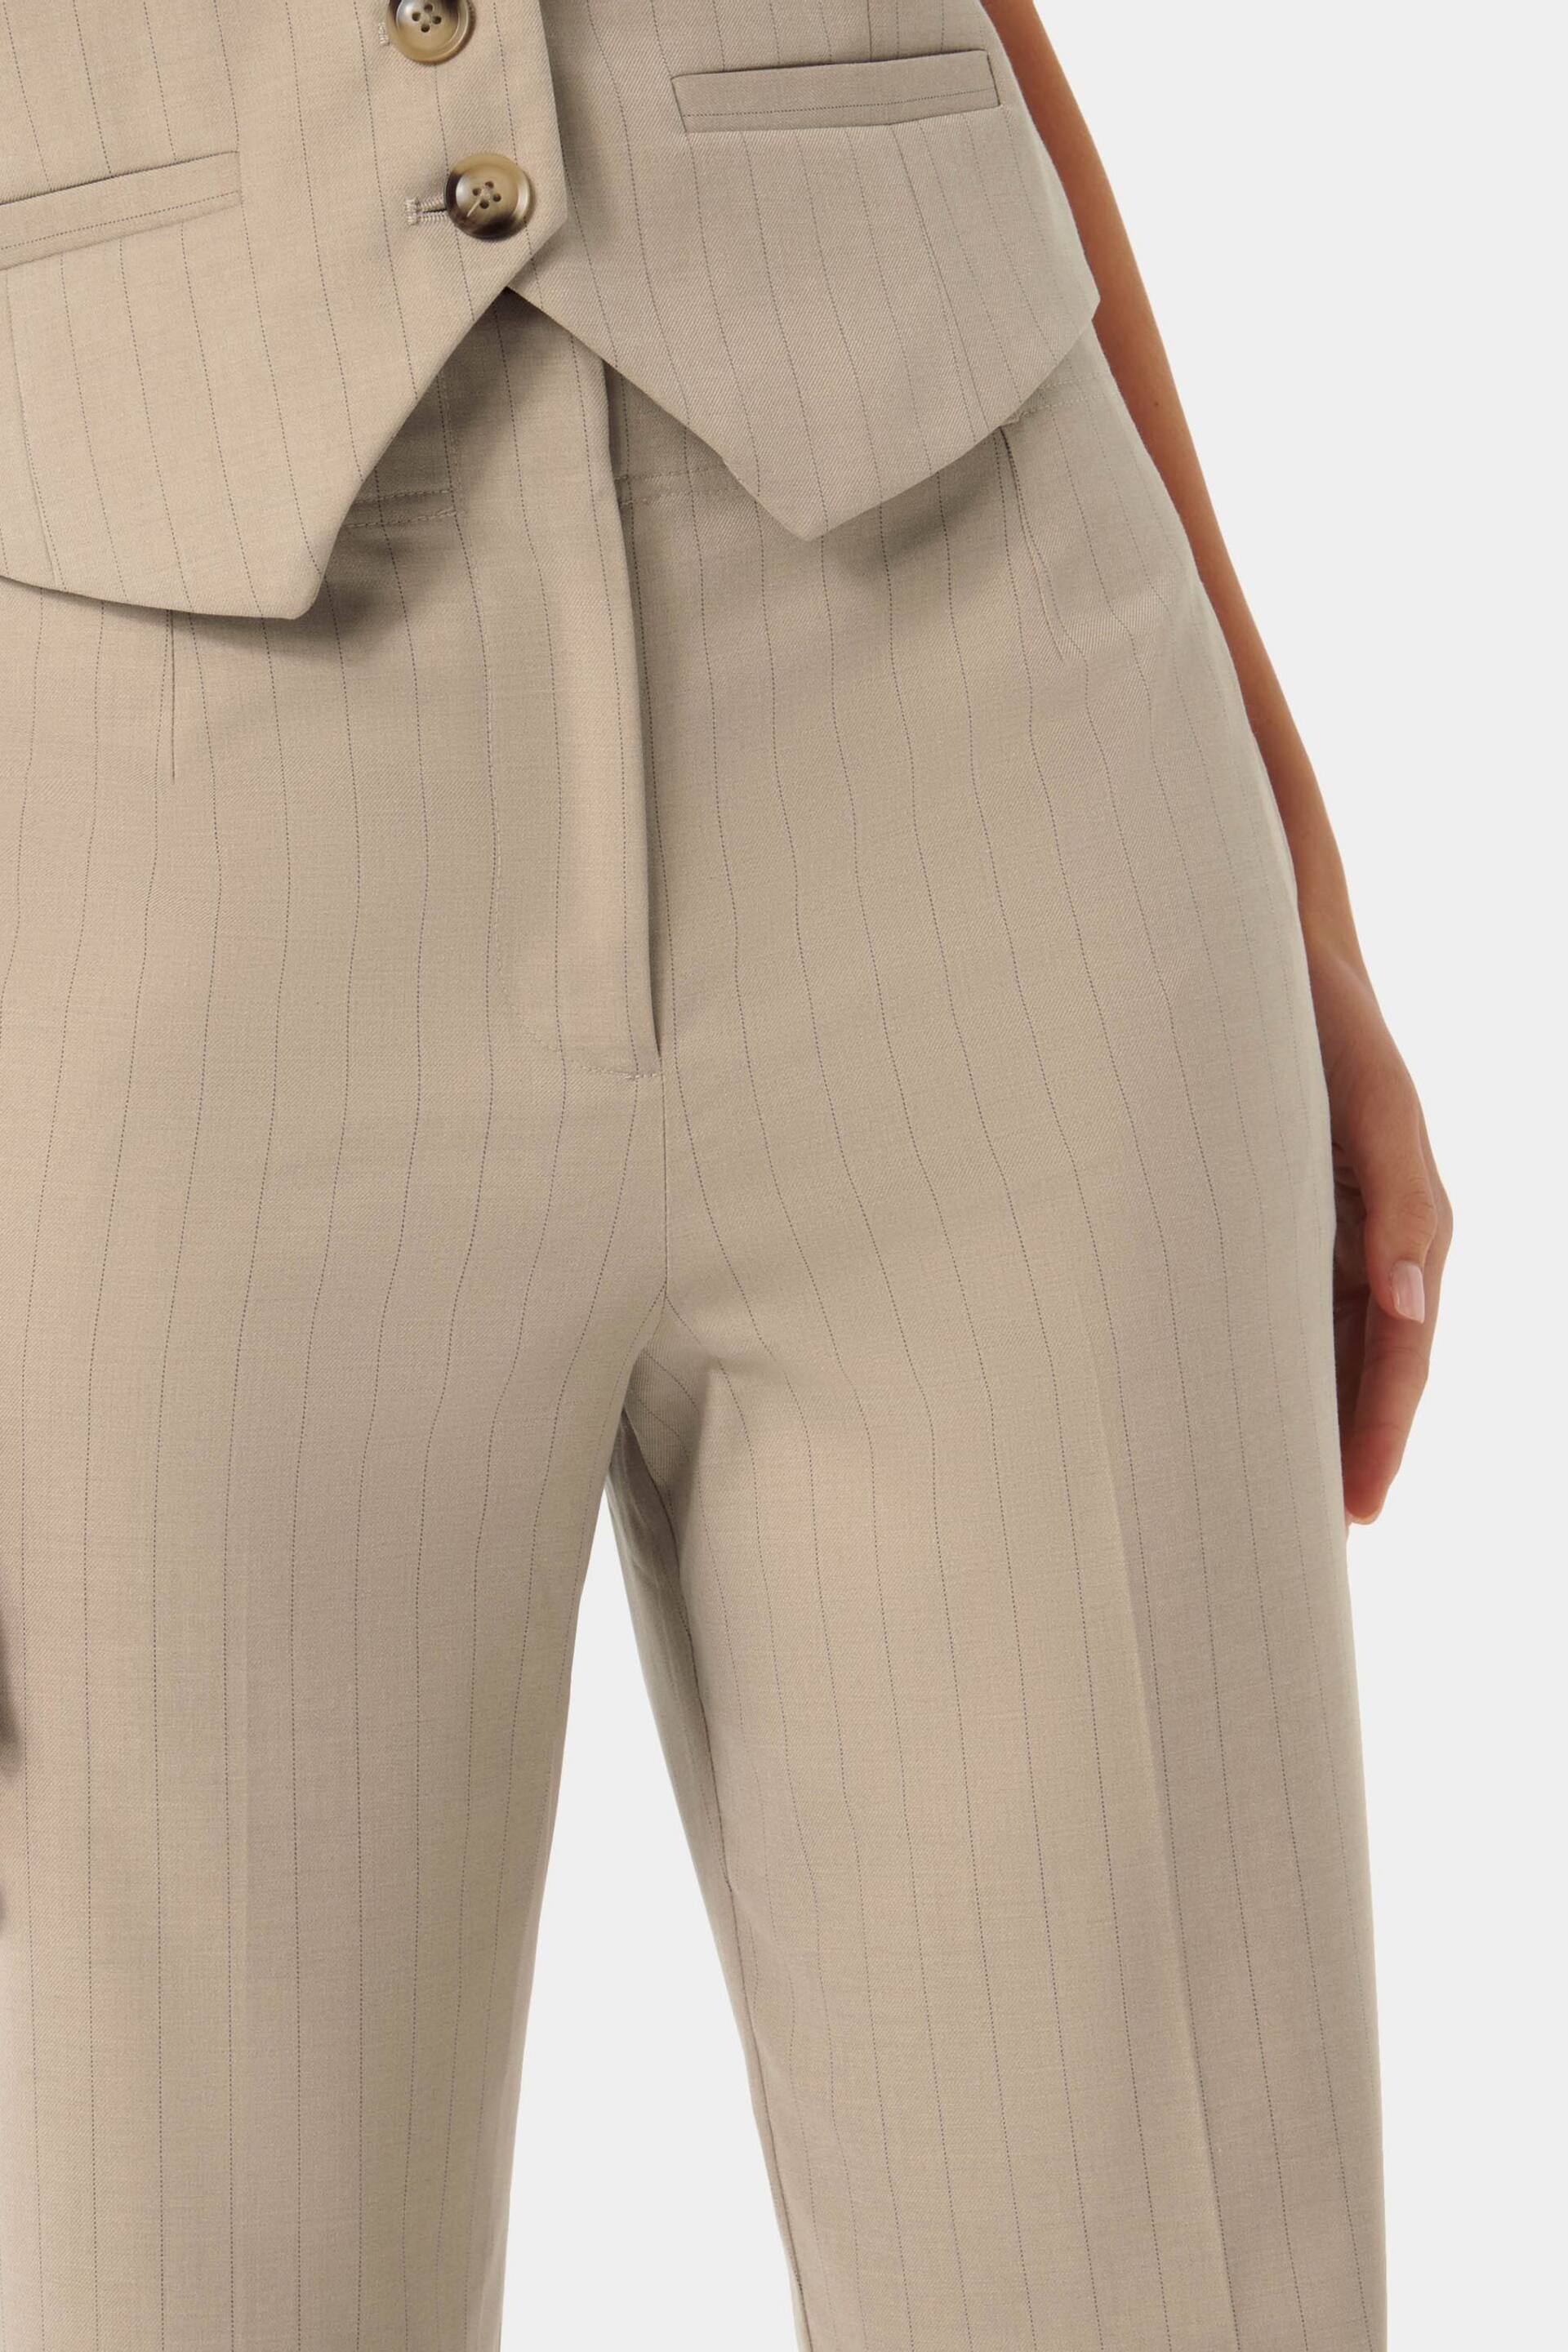 Forever New Natural Emmie Straight Leg Trousers - Image 2 of 5